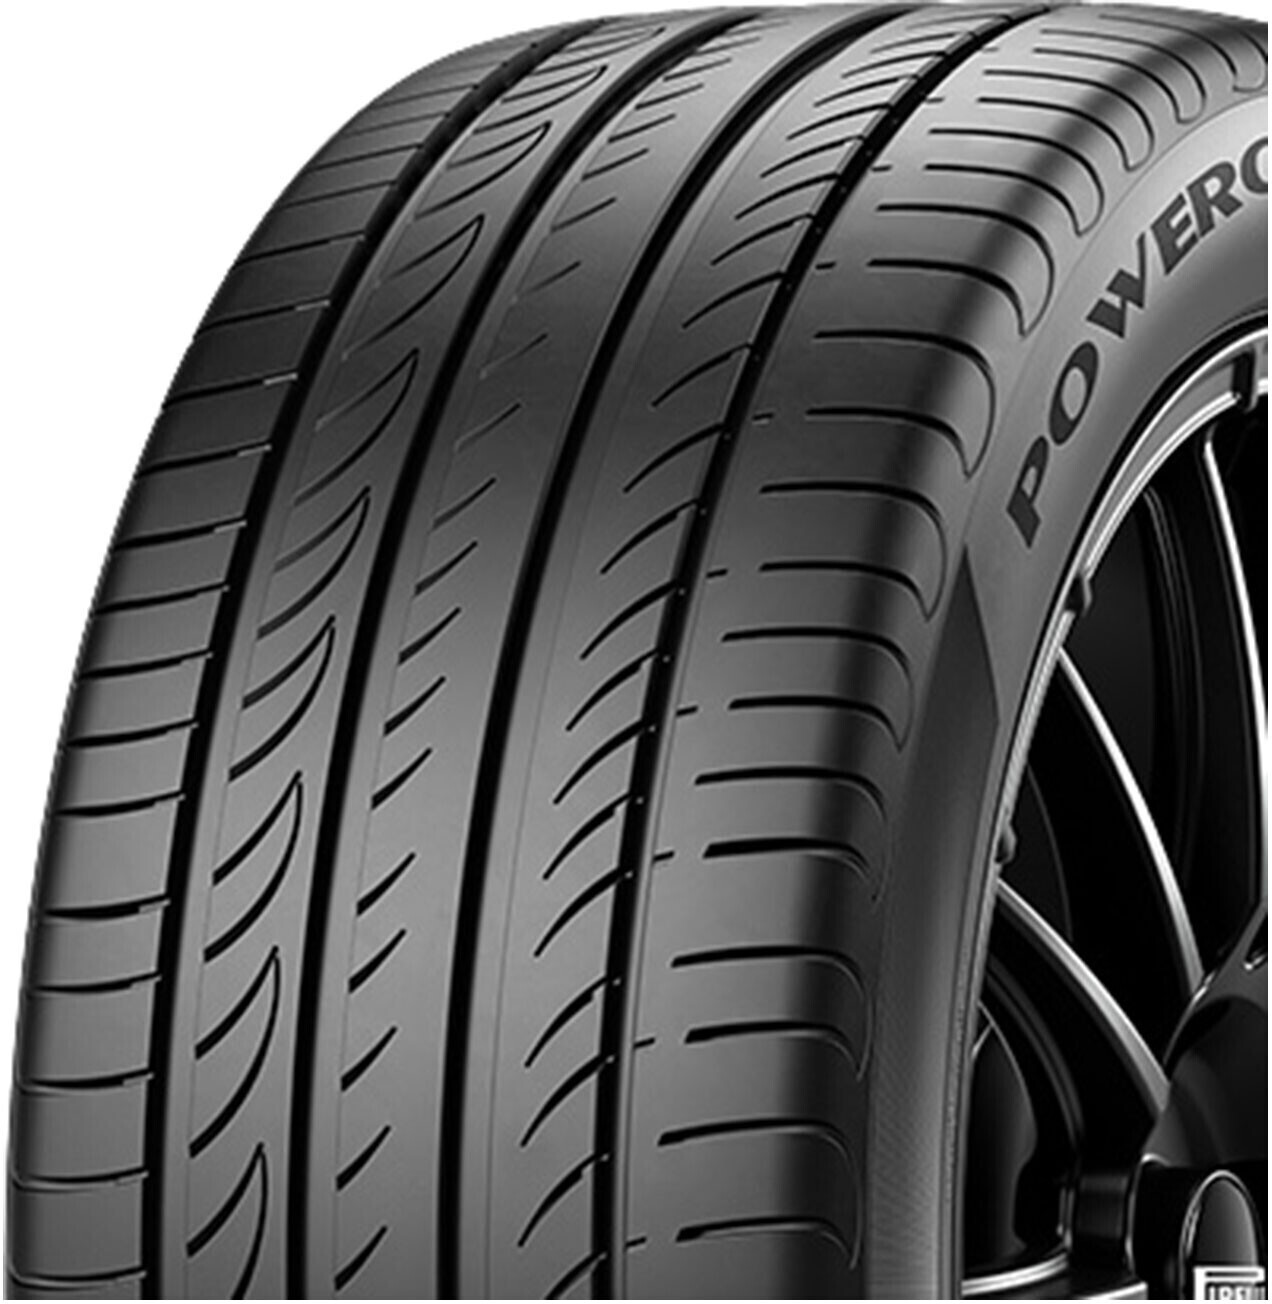 Buy Pirelli Powergy 215/45 R18 93Y XL from £95.31 (Today) – Best Deals on  idealo.co.uk